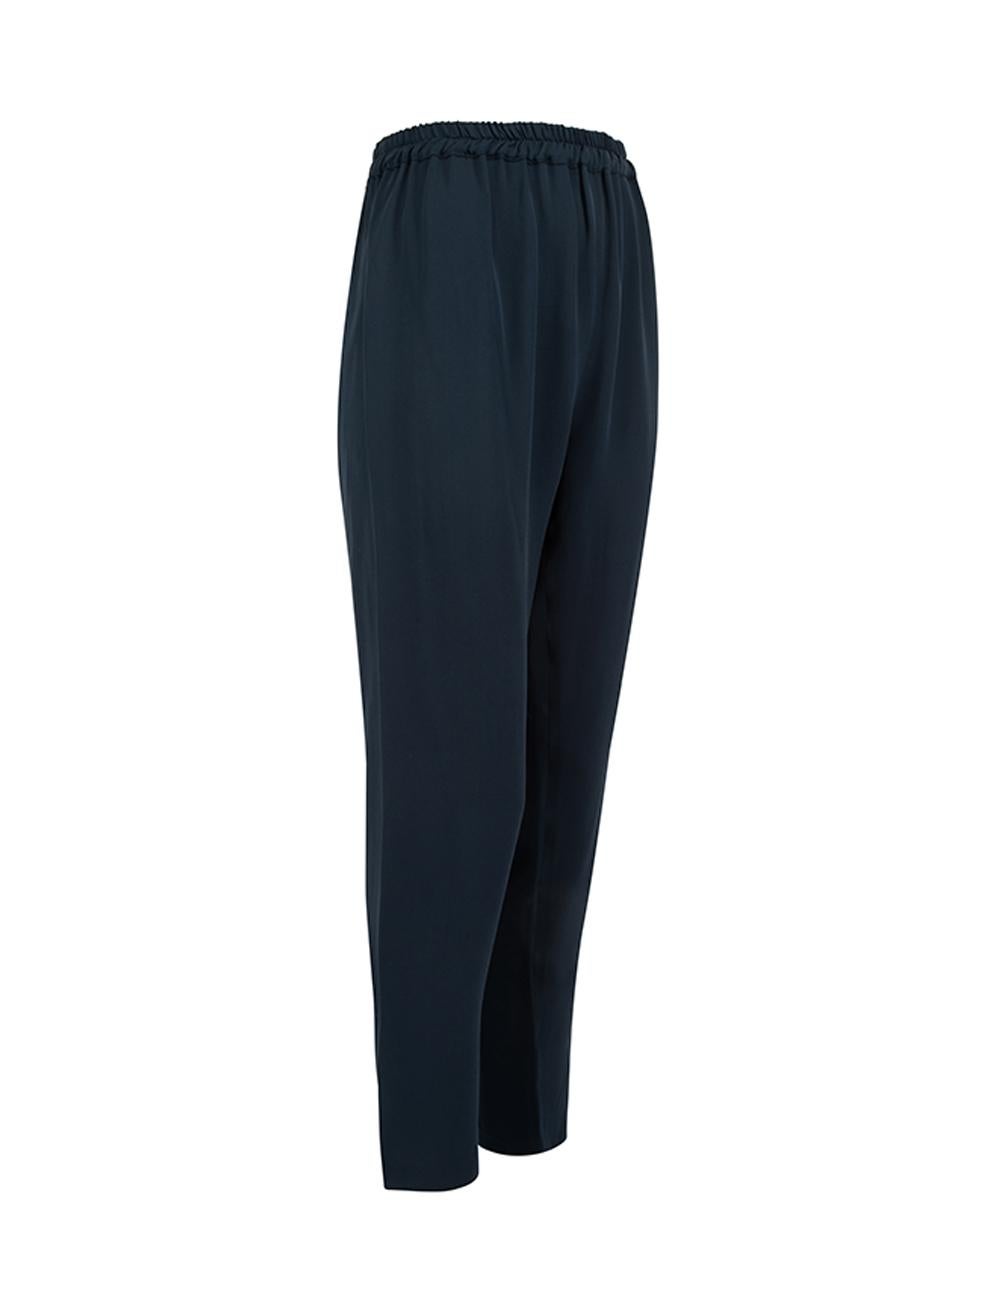 CONDITION is Very good. Hardly any visible wear to trousers is evident on this used Mansur Gavriel designer resale item. Details Navy Silk Cropped trousers Straight leg High rise Elasticated waistband Made in Italy Composition 100% Silk Care